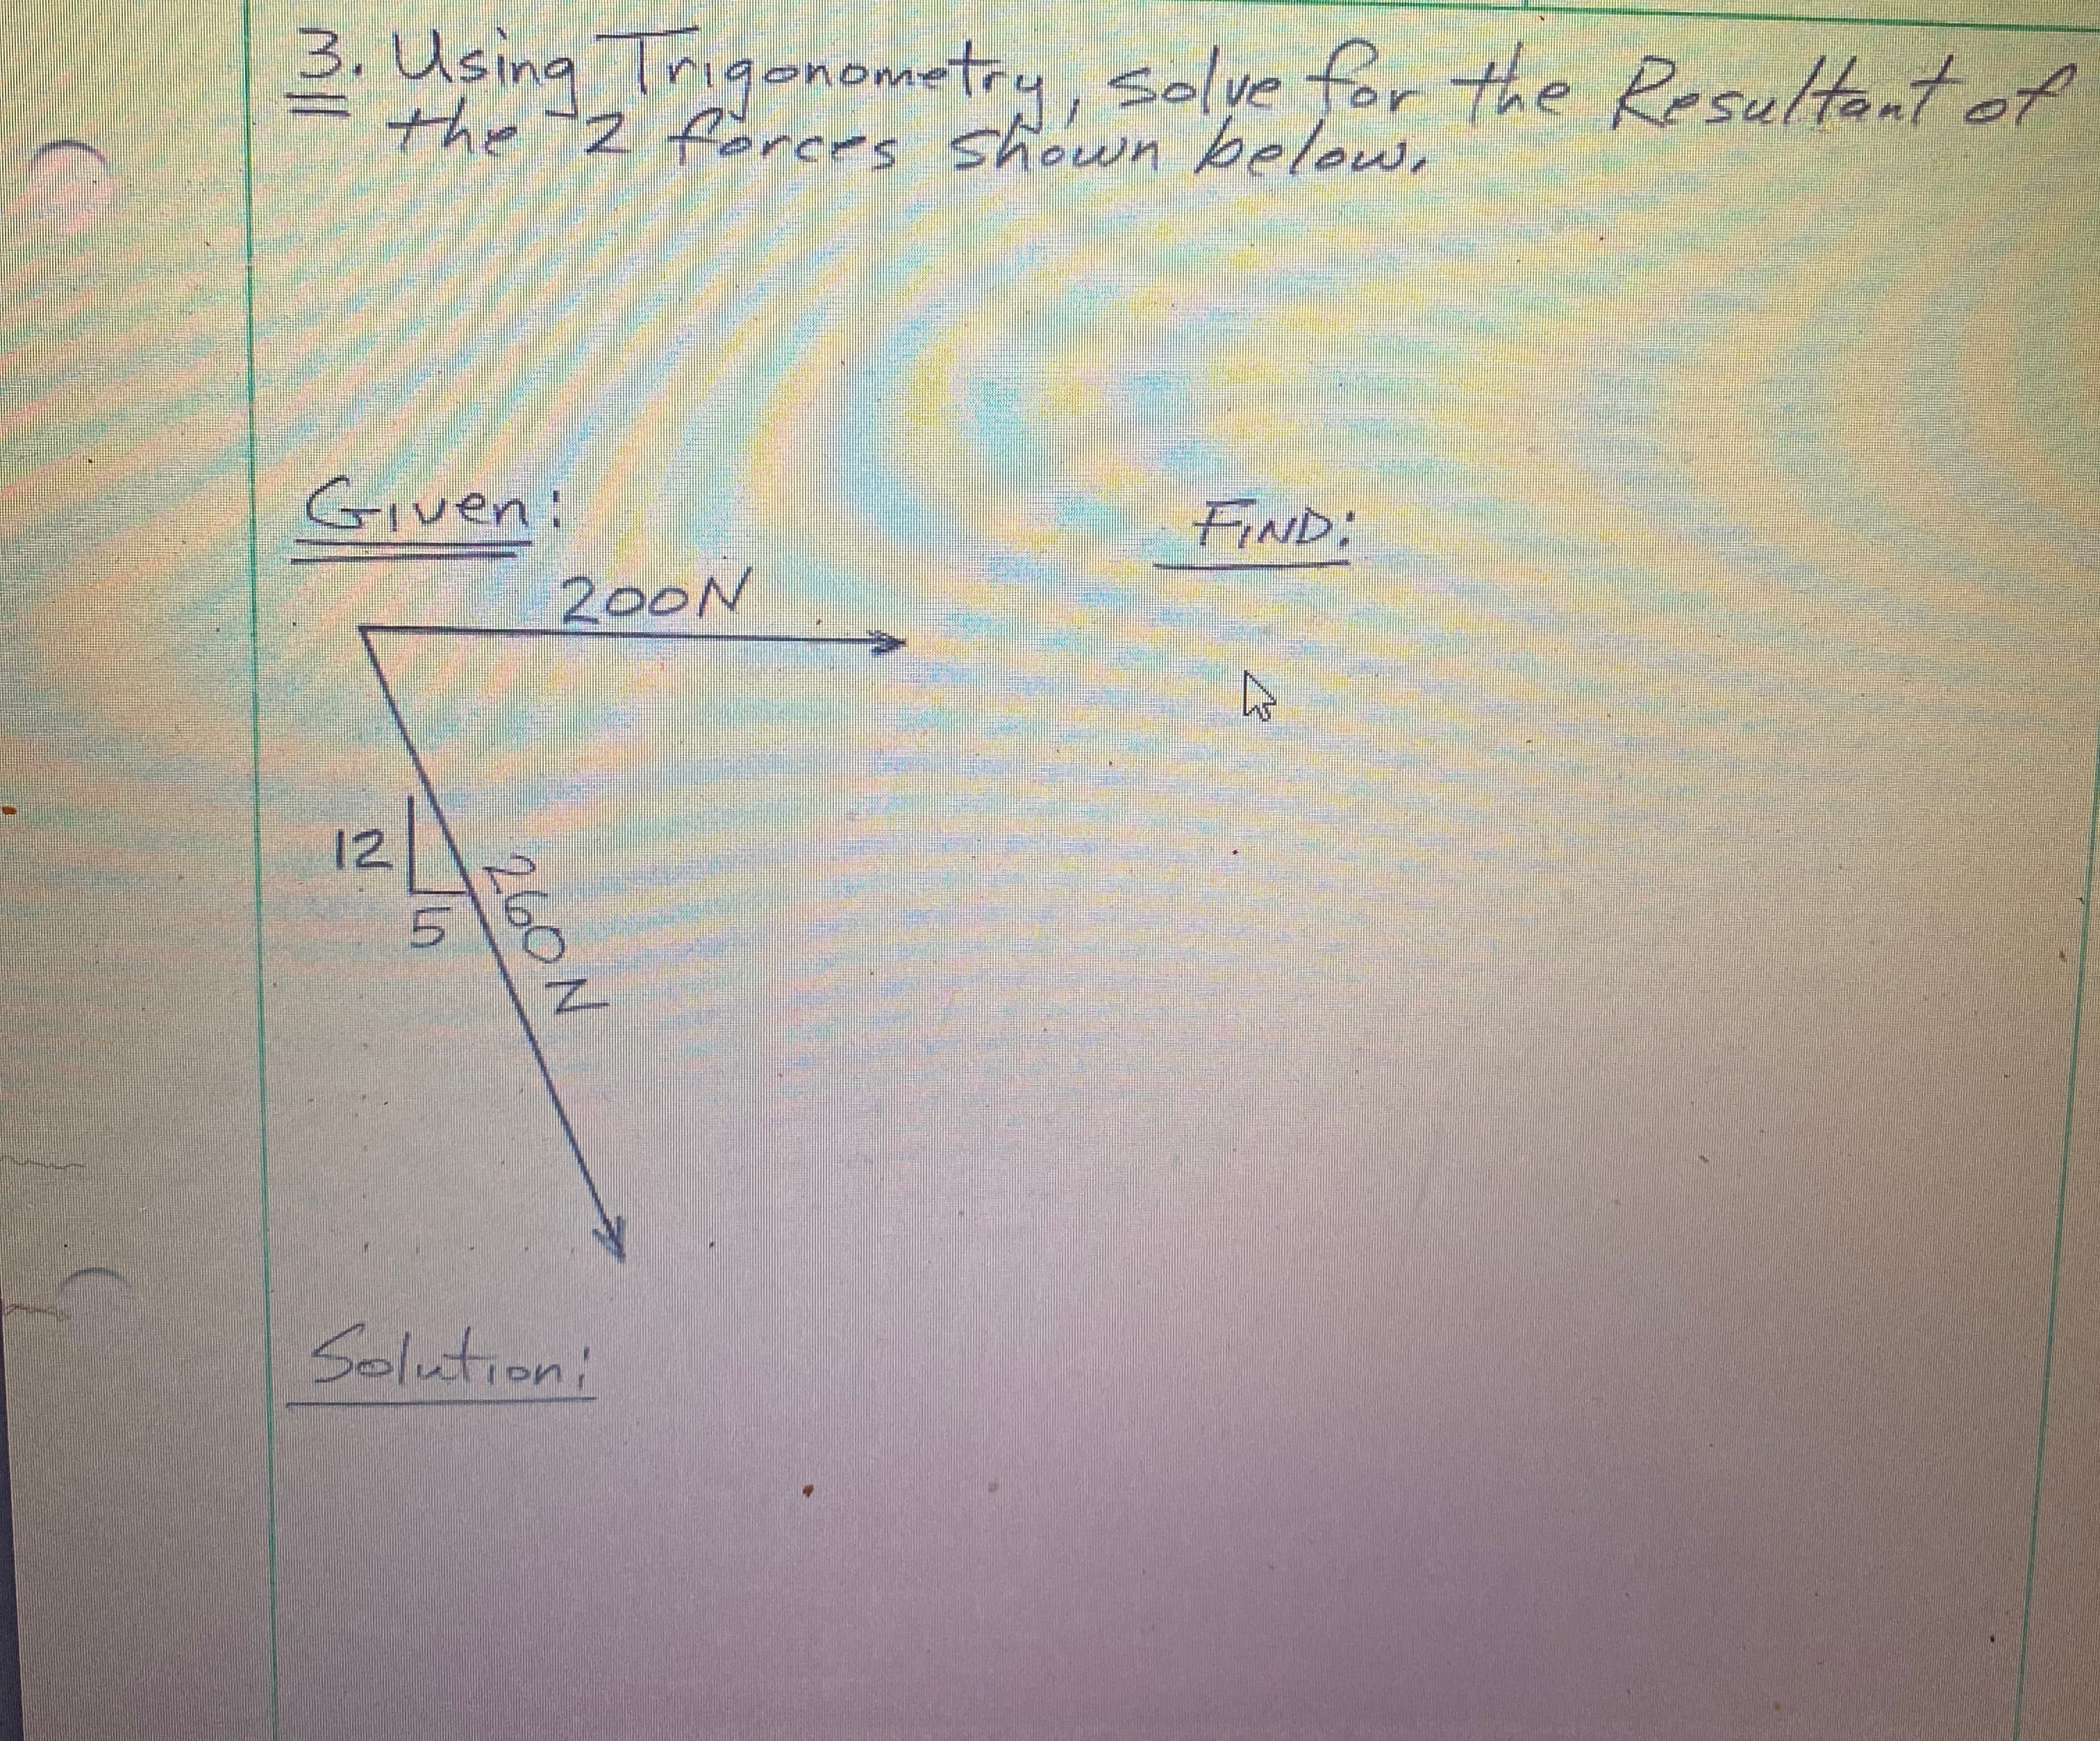 3. Using Trigonometry, solve for the Resultant of
the
e
72 forces shown below,
